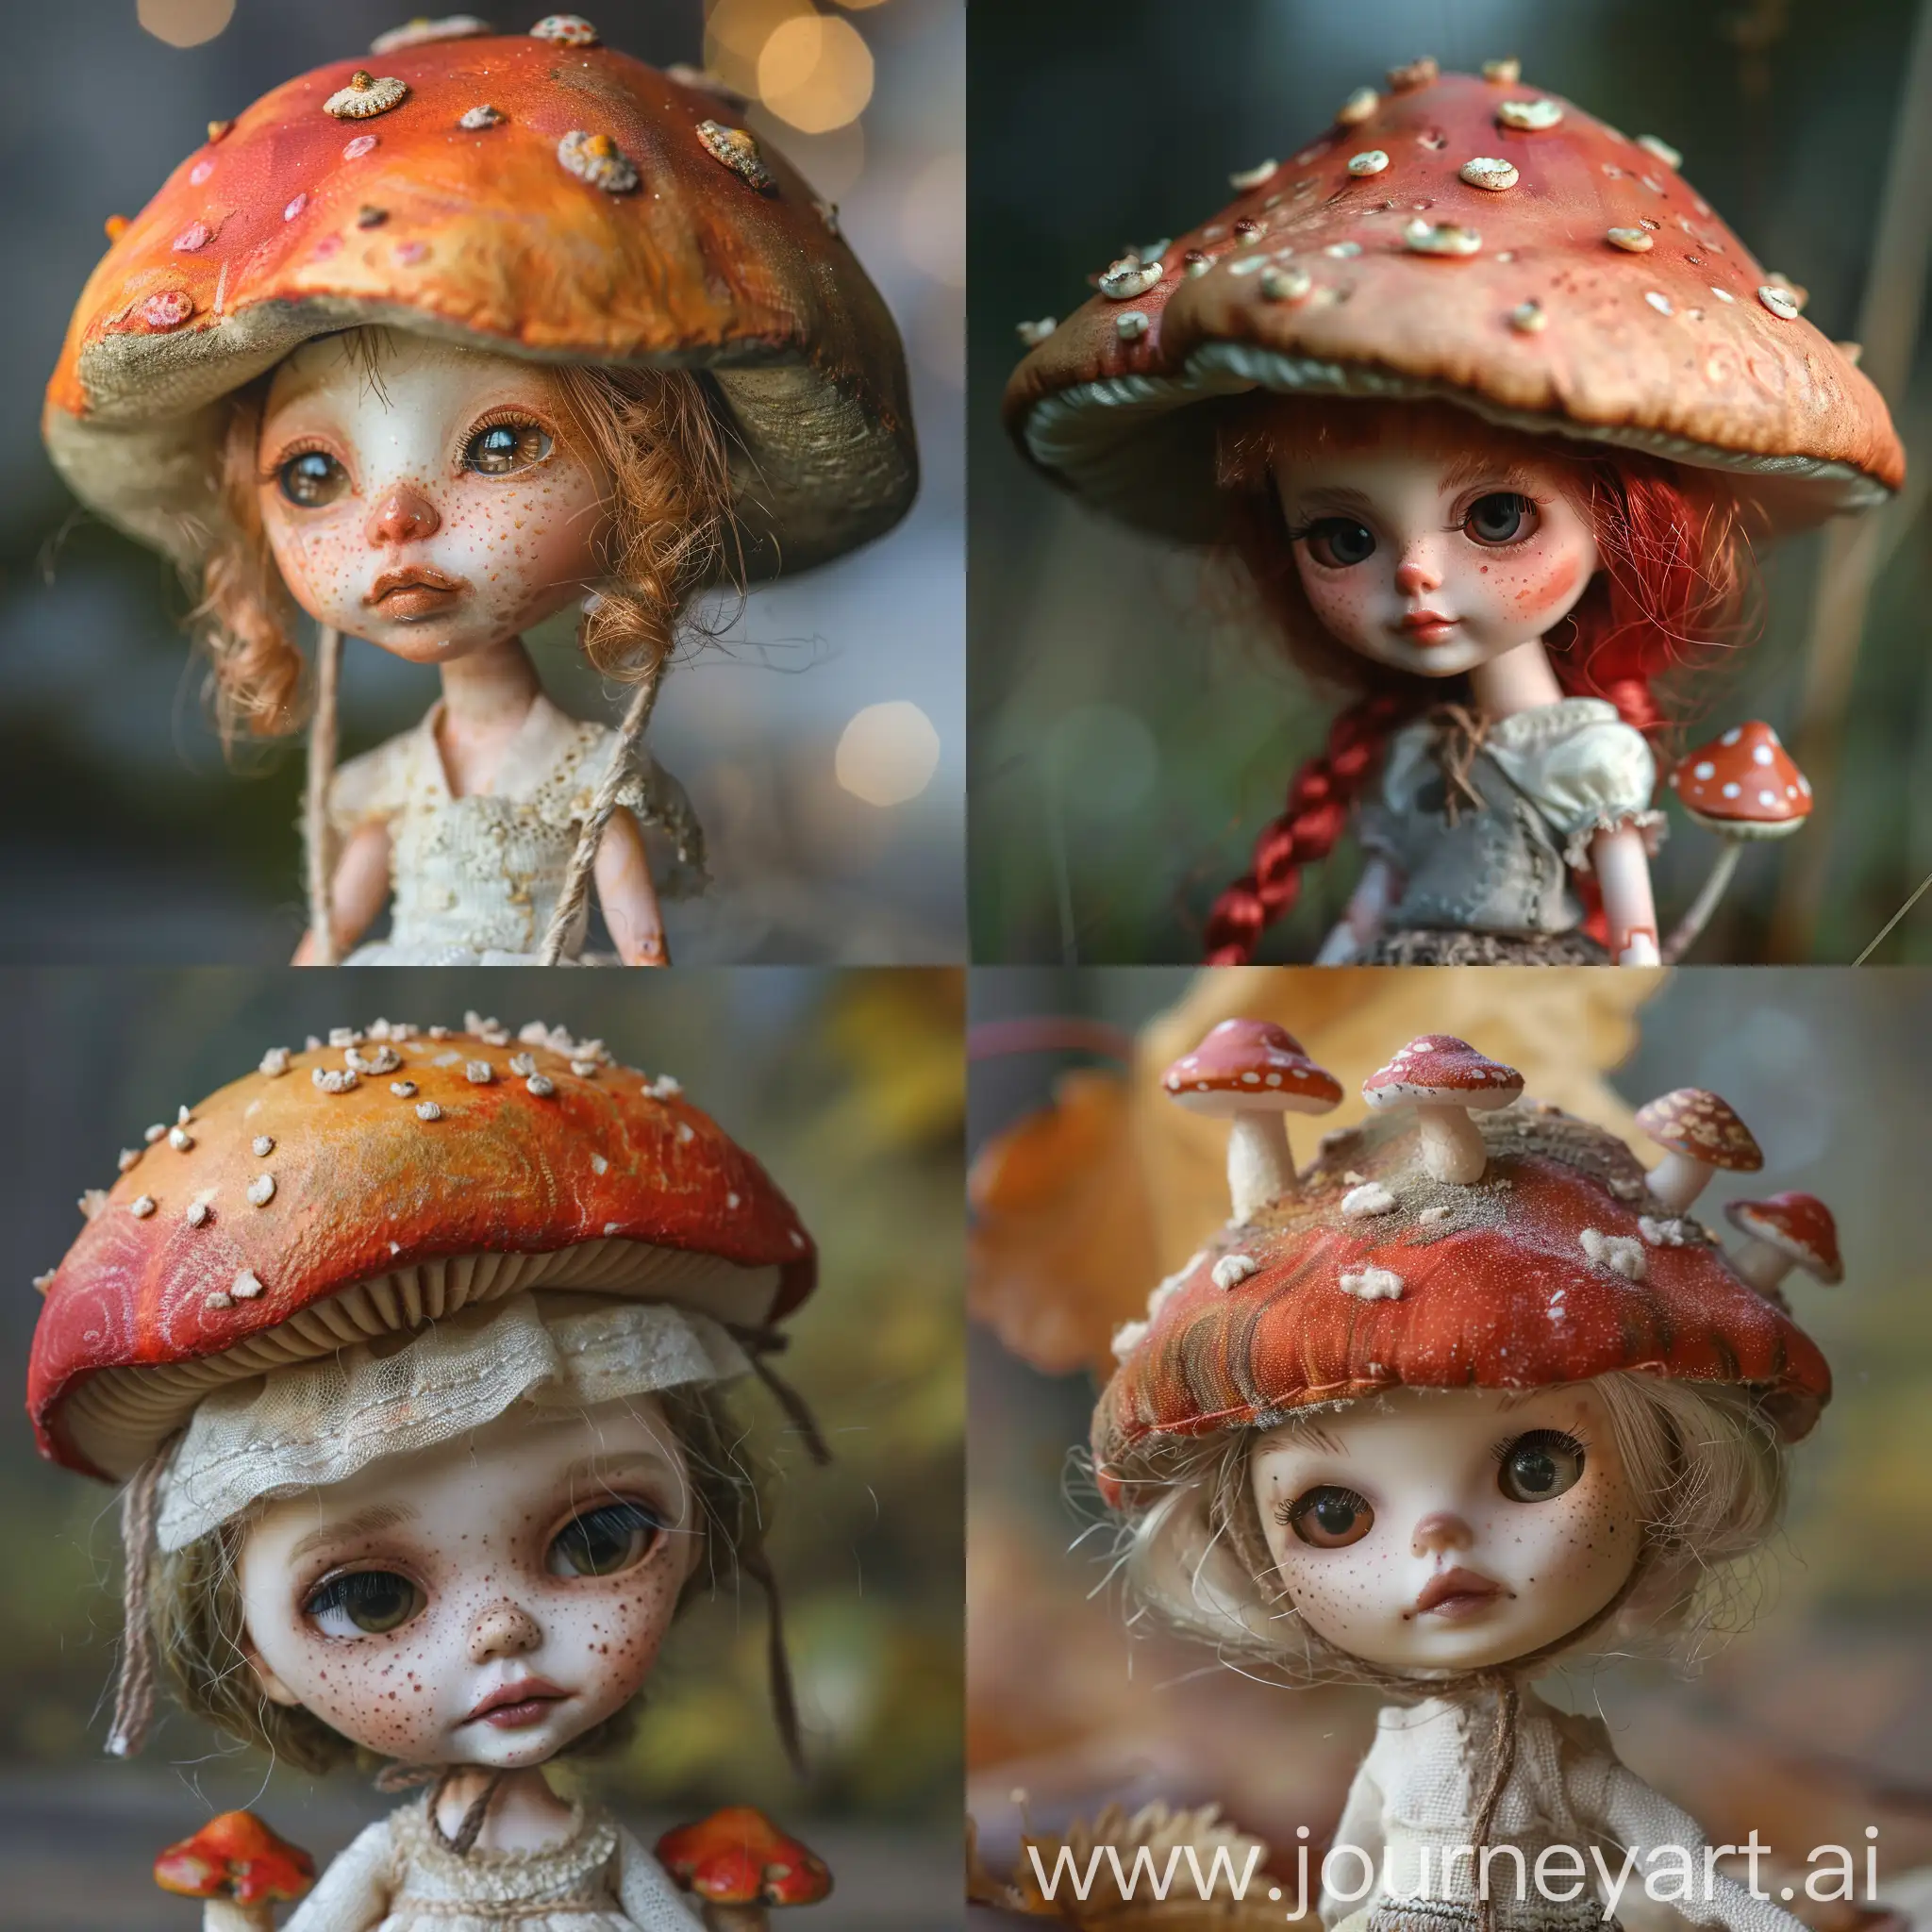 Adorable-Small-Girl-Doll-Wearing-Mushroom-Hat-in-4K-Resolution